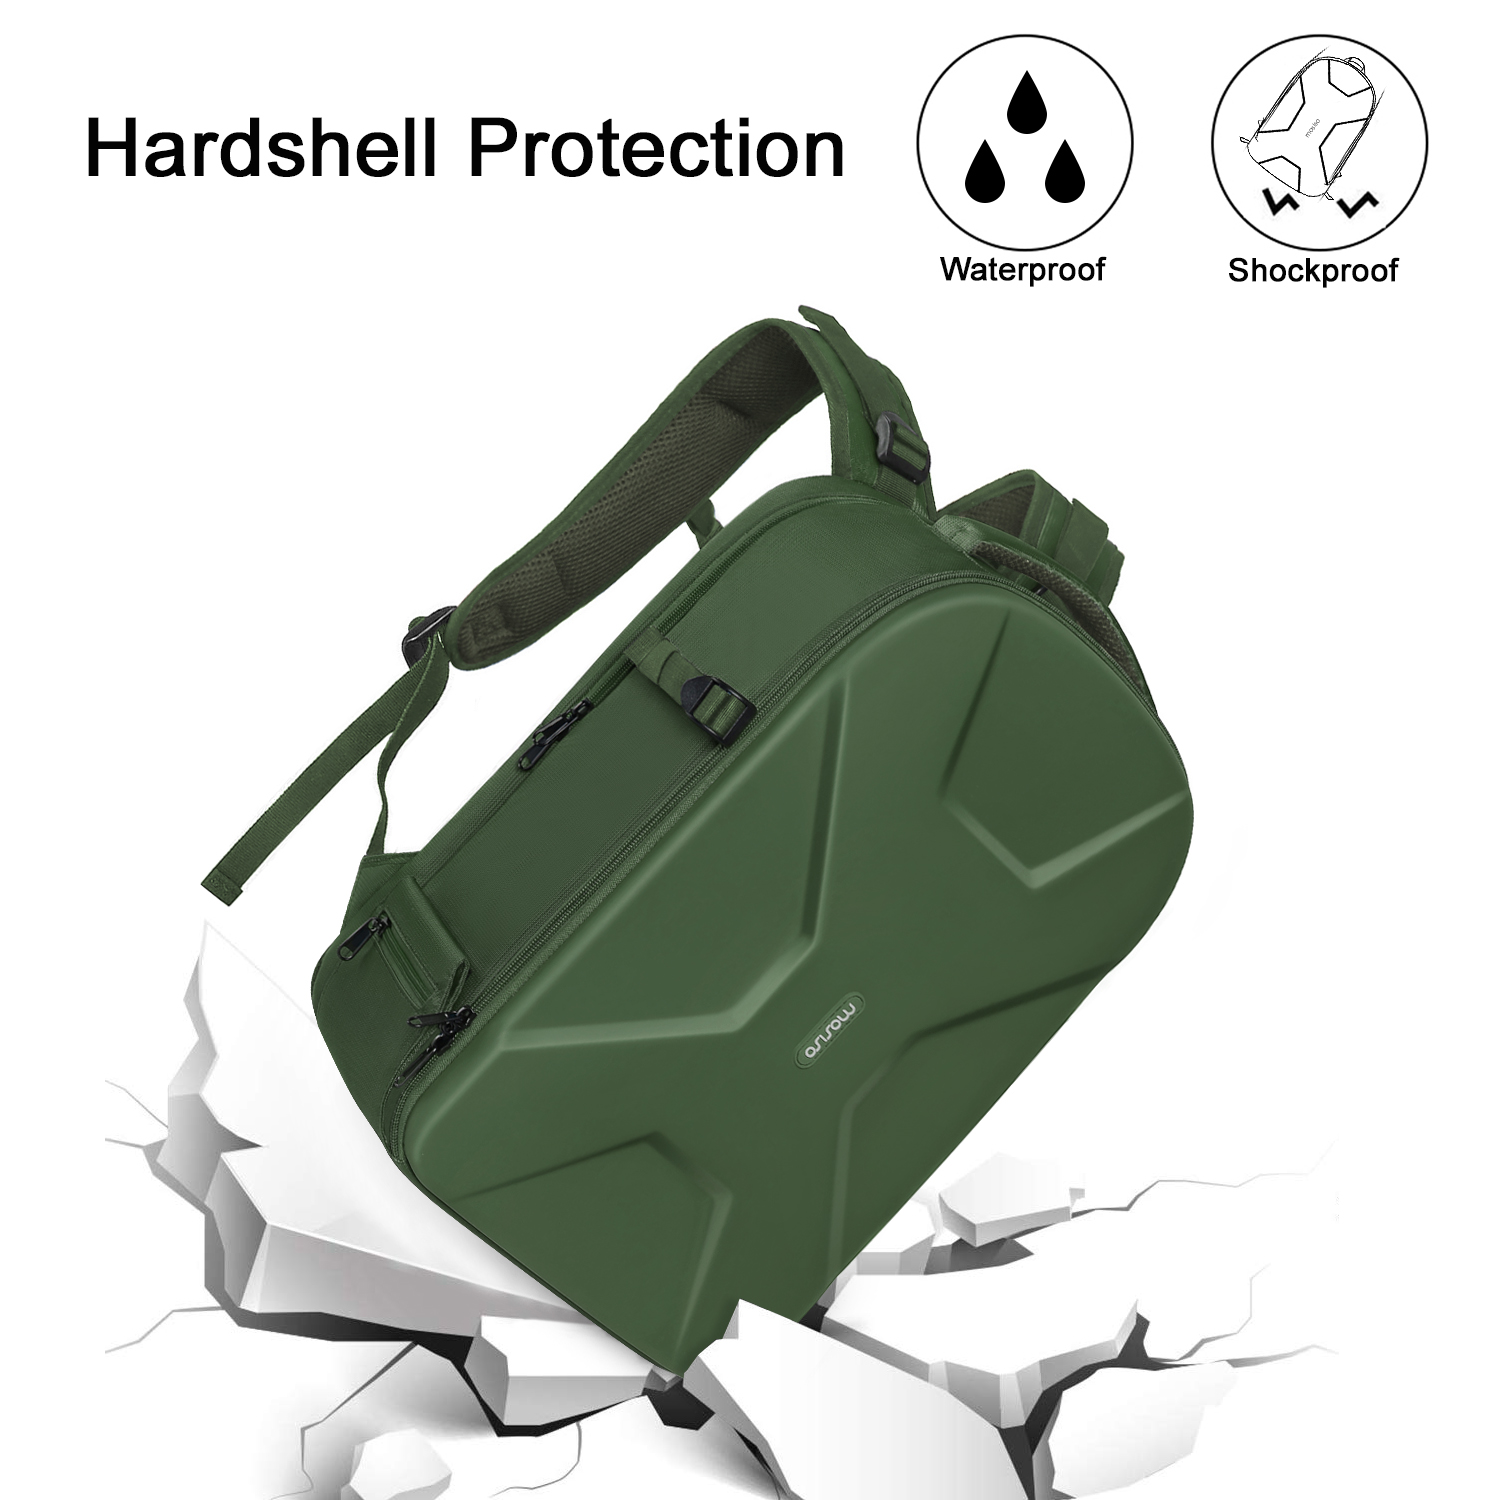 Mosiso Camera Backpack for Canon/Nikon/Sony/DJI Mavic Drone, DSLR/SLR/Mirrorless Photography Camera Bag Waterproof Hardshell Protective Case with Tripod Holder&Laptop Compartment, Army Green - image 4 of 8